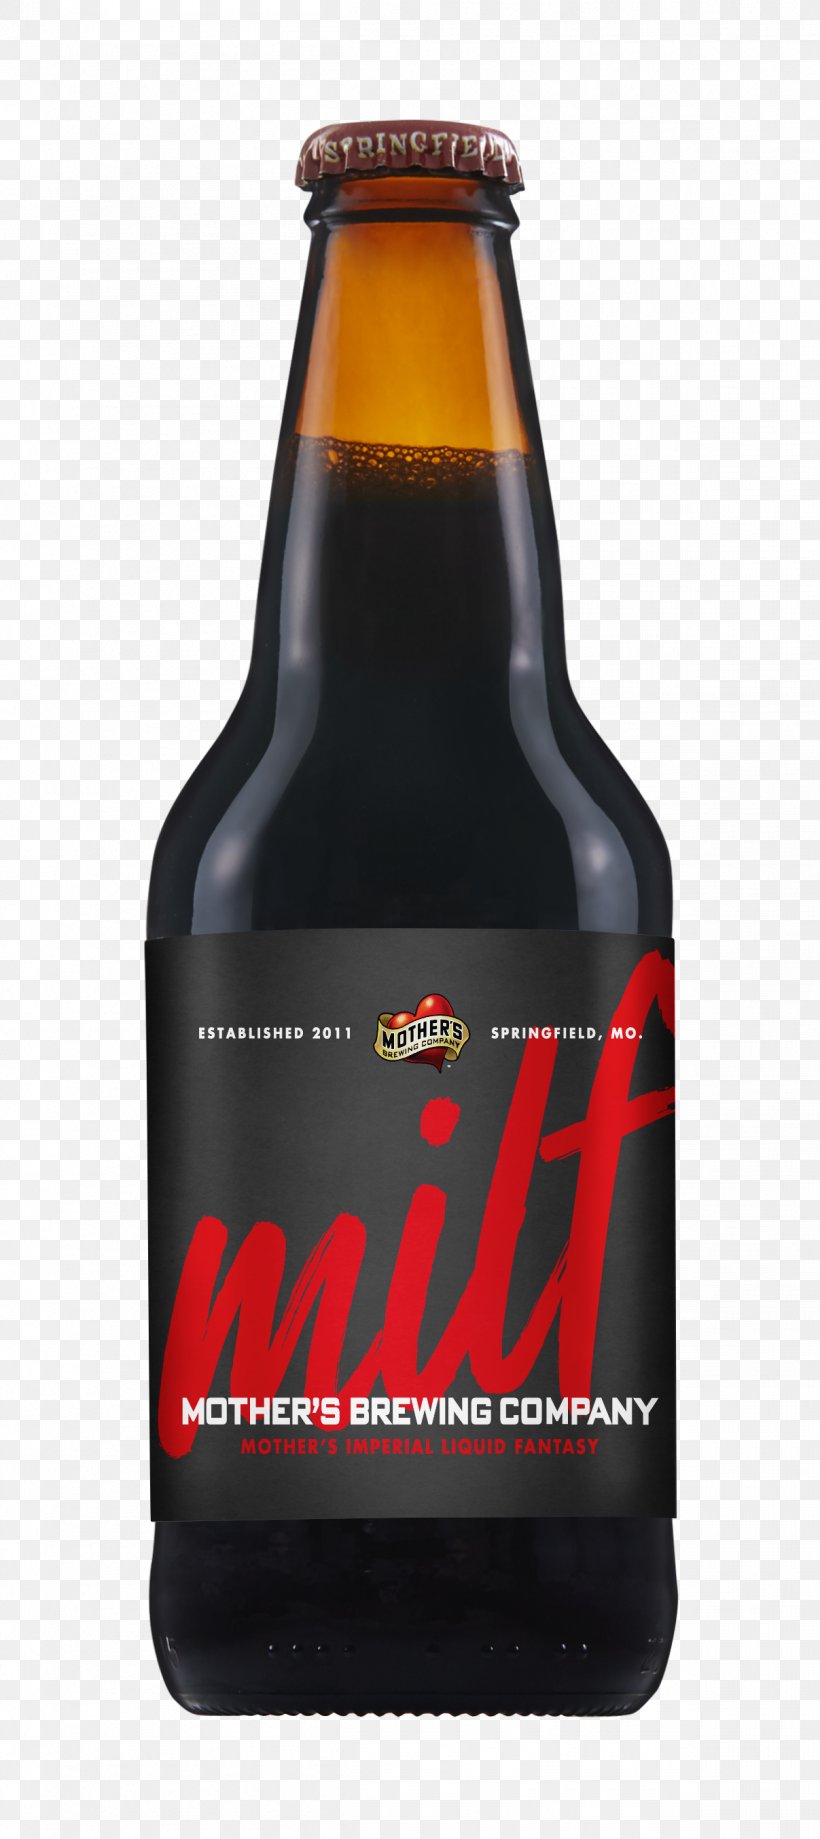 Ale Mother's Brewing Company Cobra Beer Märzen, PNG, 1207x2707px, Ale, Beer, Beer Bottle, Beer Brewing Grains Malts, Beer Festival Download Free